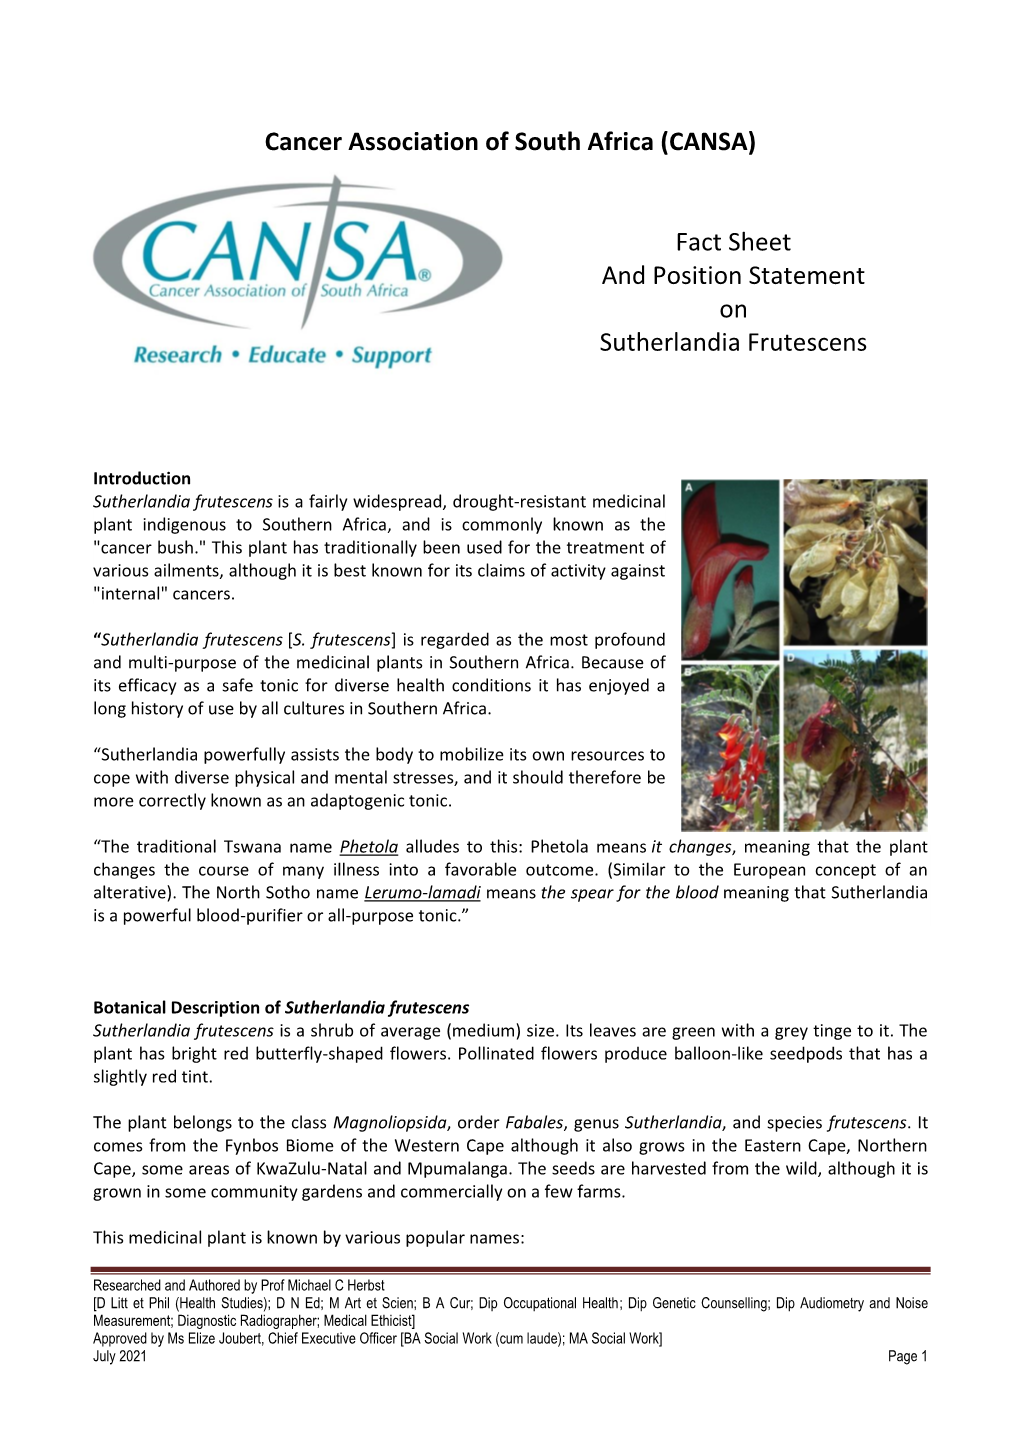 Fact Sheet and Position Statement on Sutherlandia Frutescens